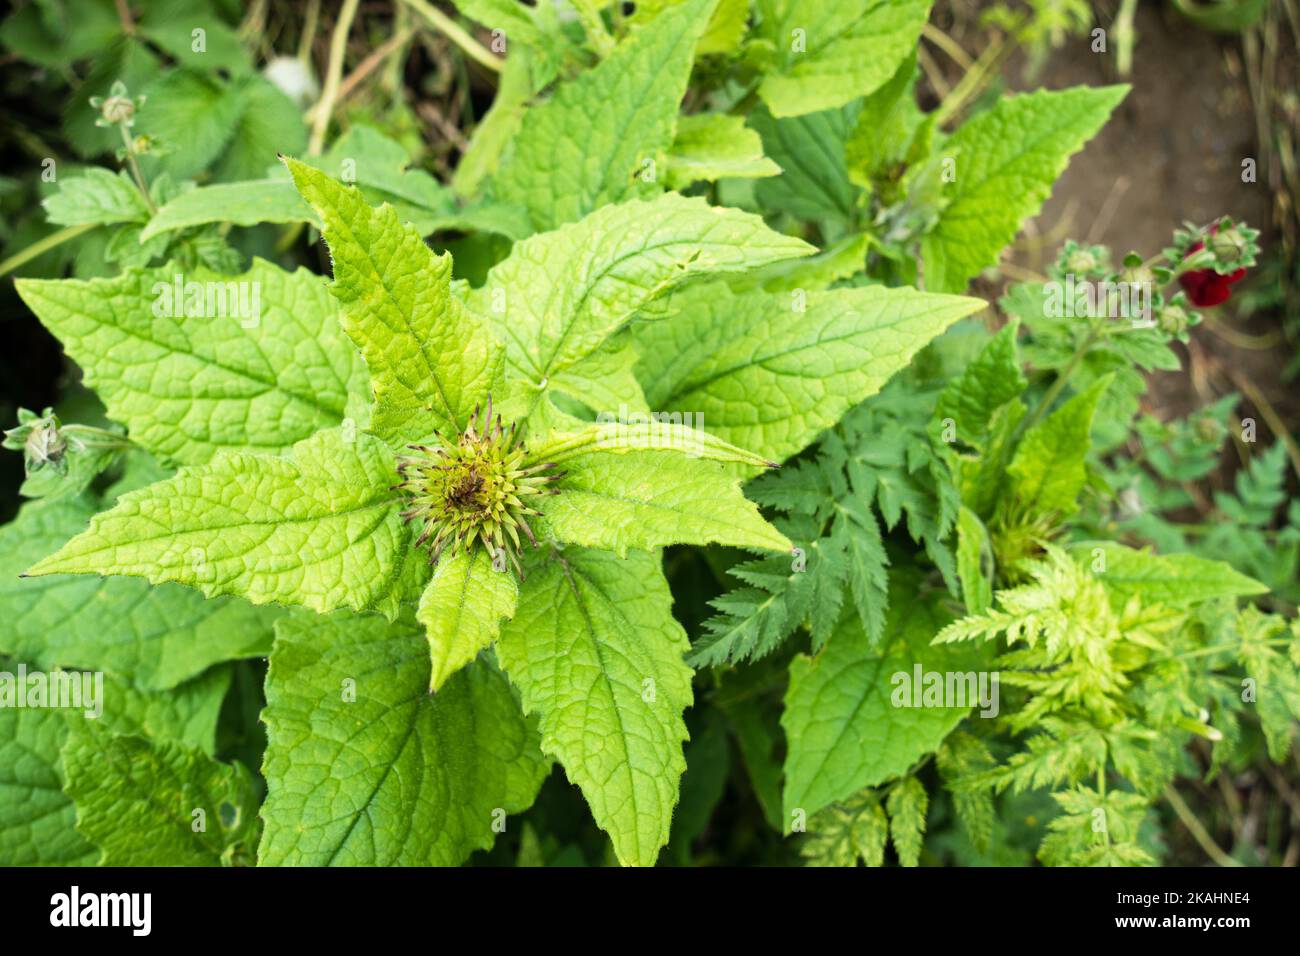 Sigesbeckia orientalis, commonly known as Indian weed or common St. Paul's wort, is a species of flowering plant in the family Asteraceae. foothills o Stock Photo